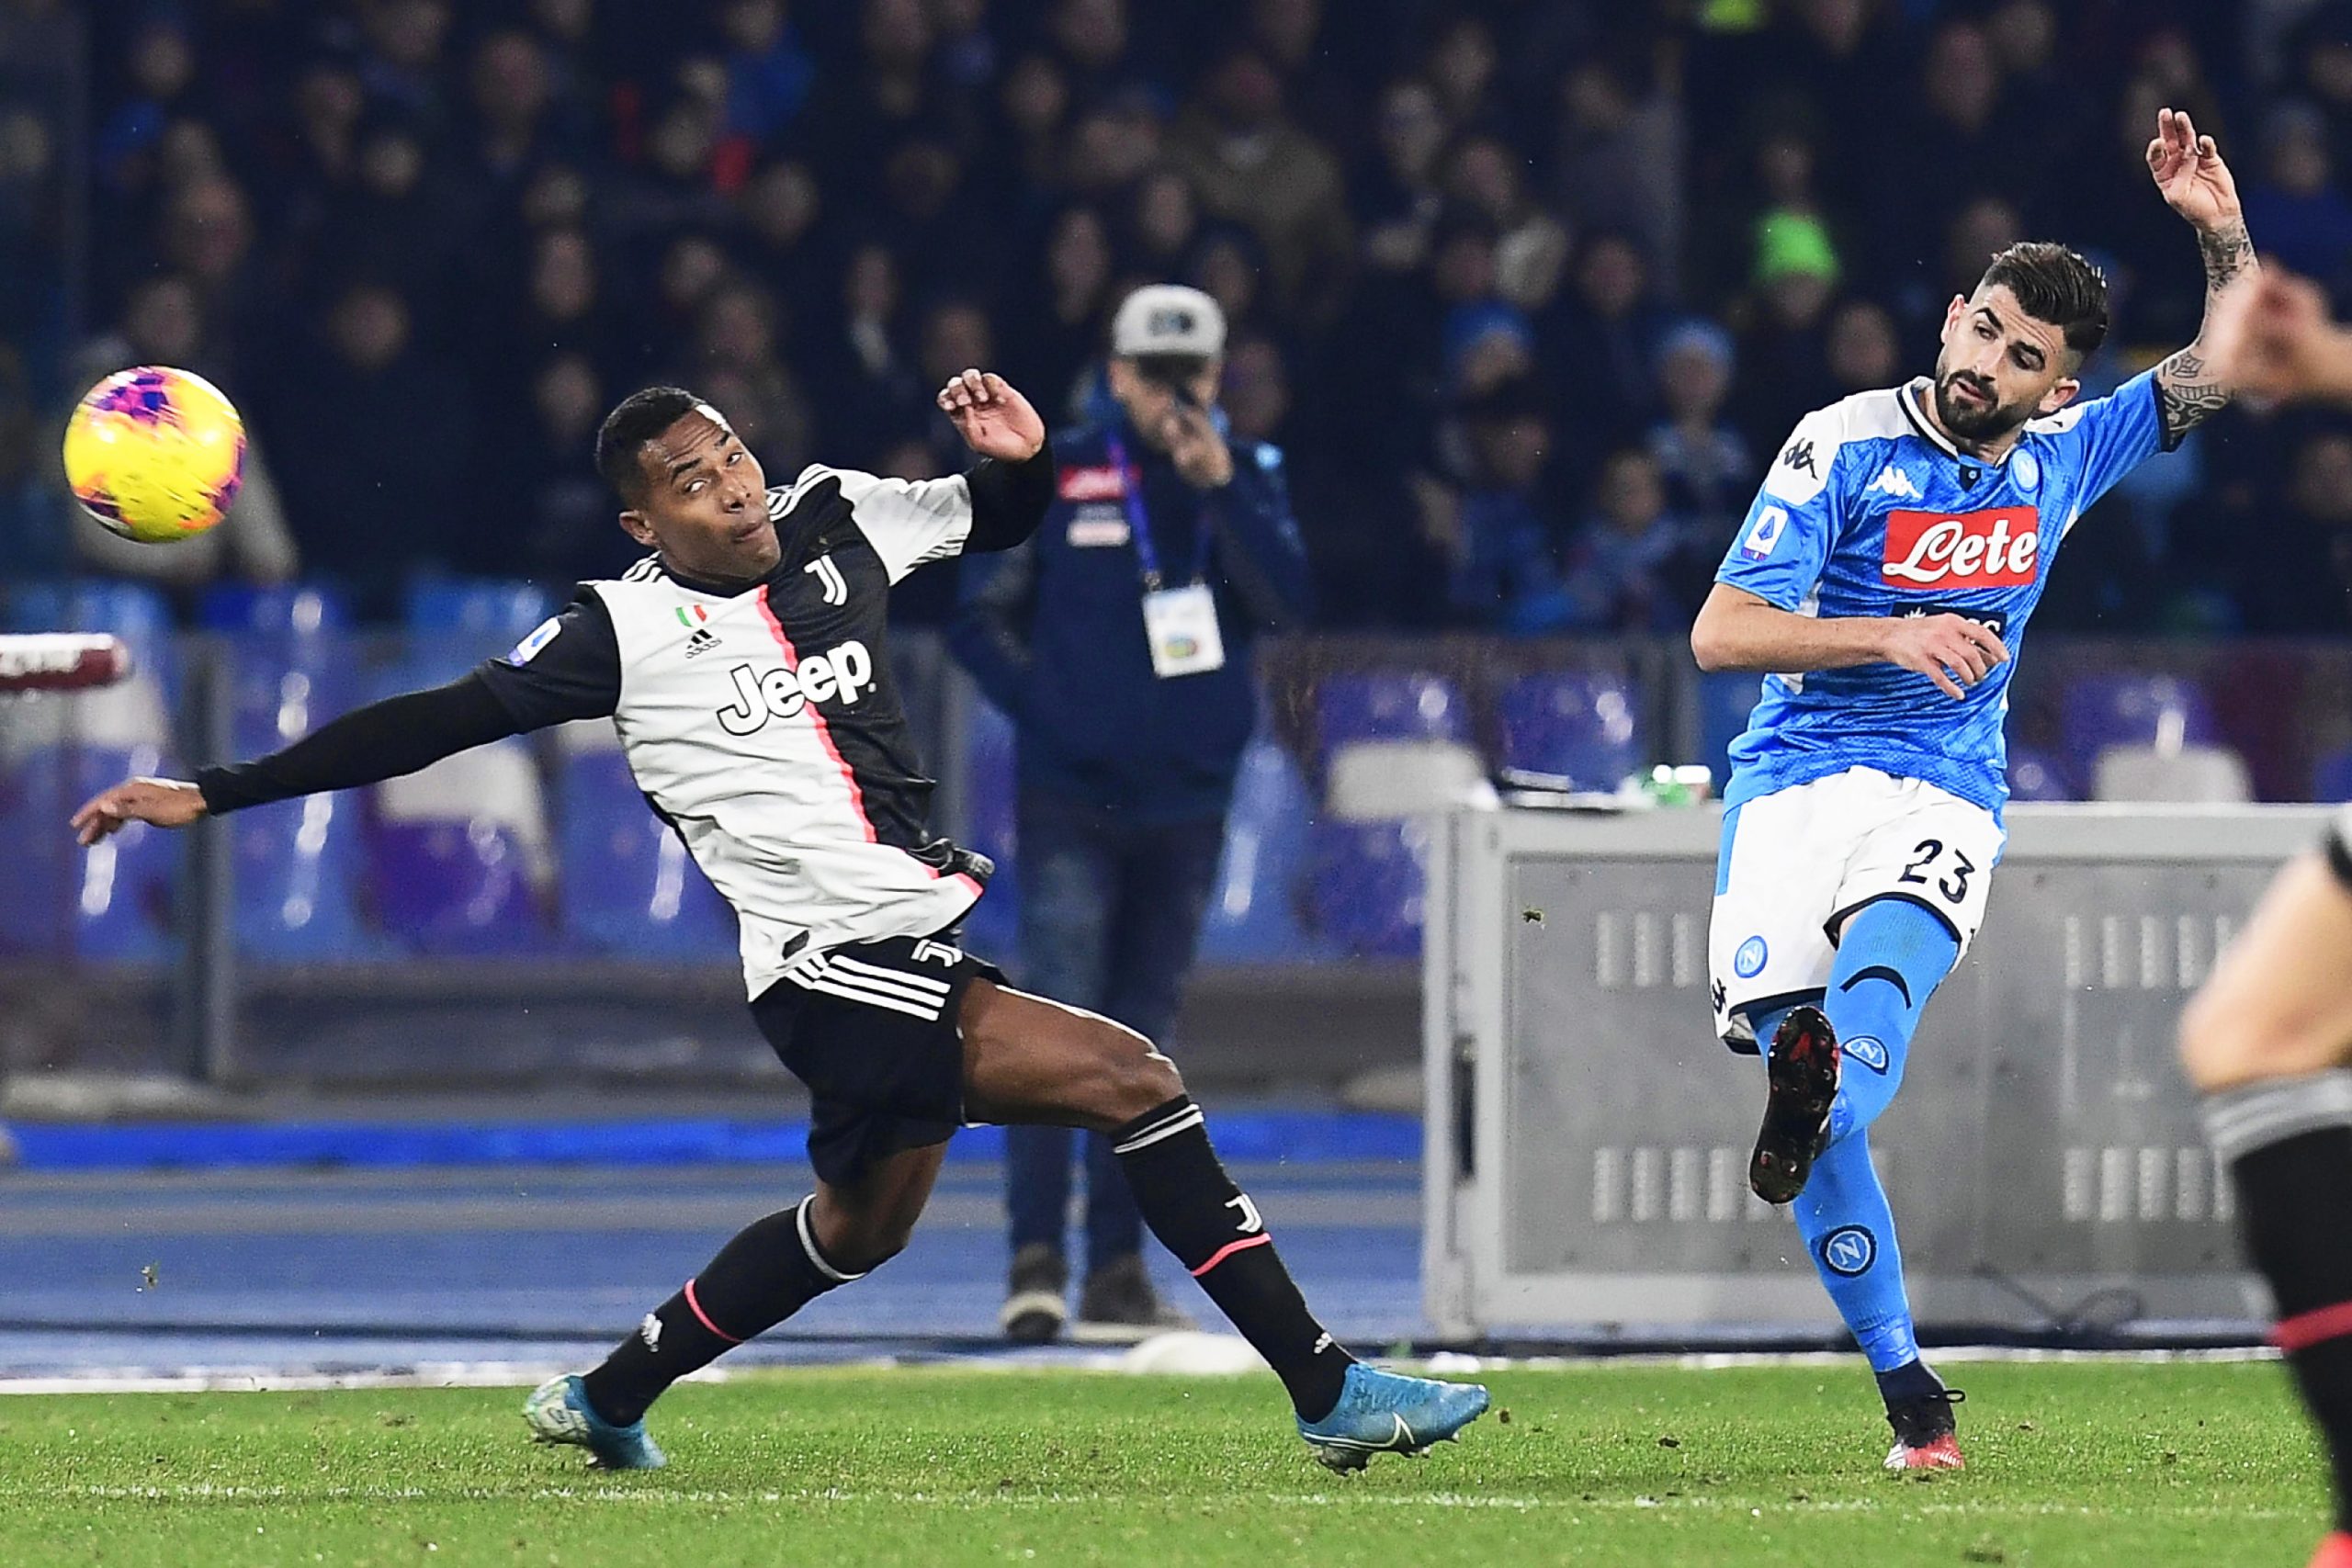 epa08167862 Napoli's Elseid Hysaj (R) in action against Juventus' Alex Sandro (L) during the Italian Serie A soccer match between SSC Napoli and Juventus FC at San Paolo stadium in Naples, Italy, 26 January 2020.  EPA/CIRO FUSCO